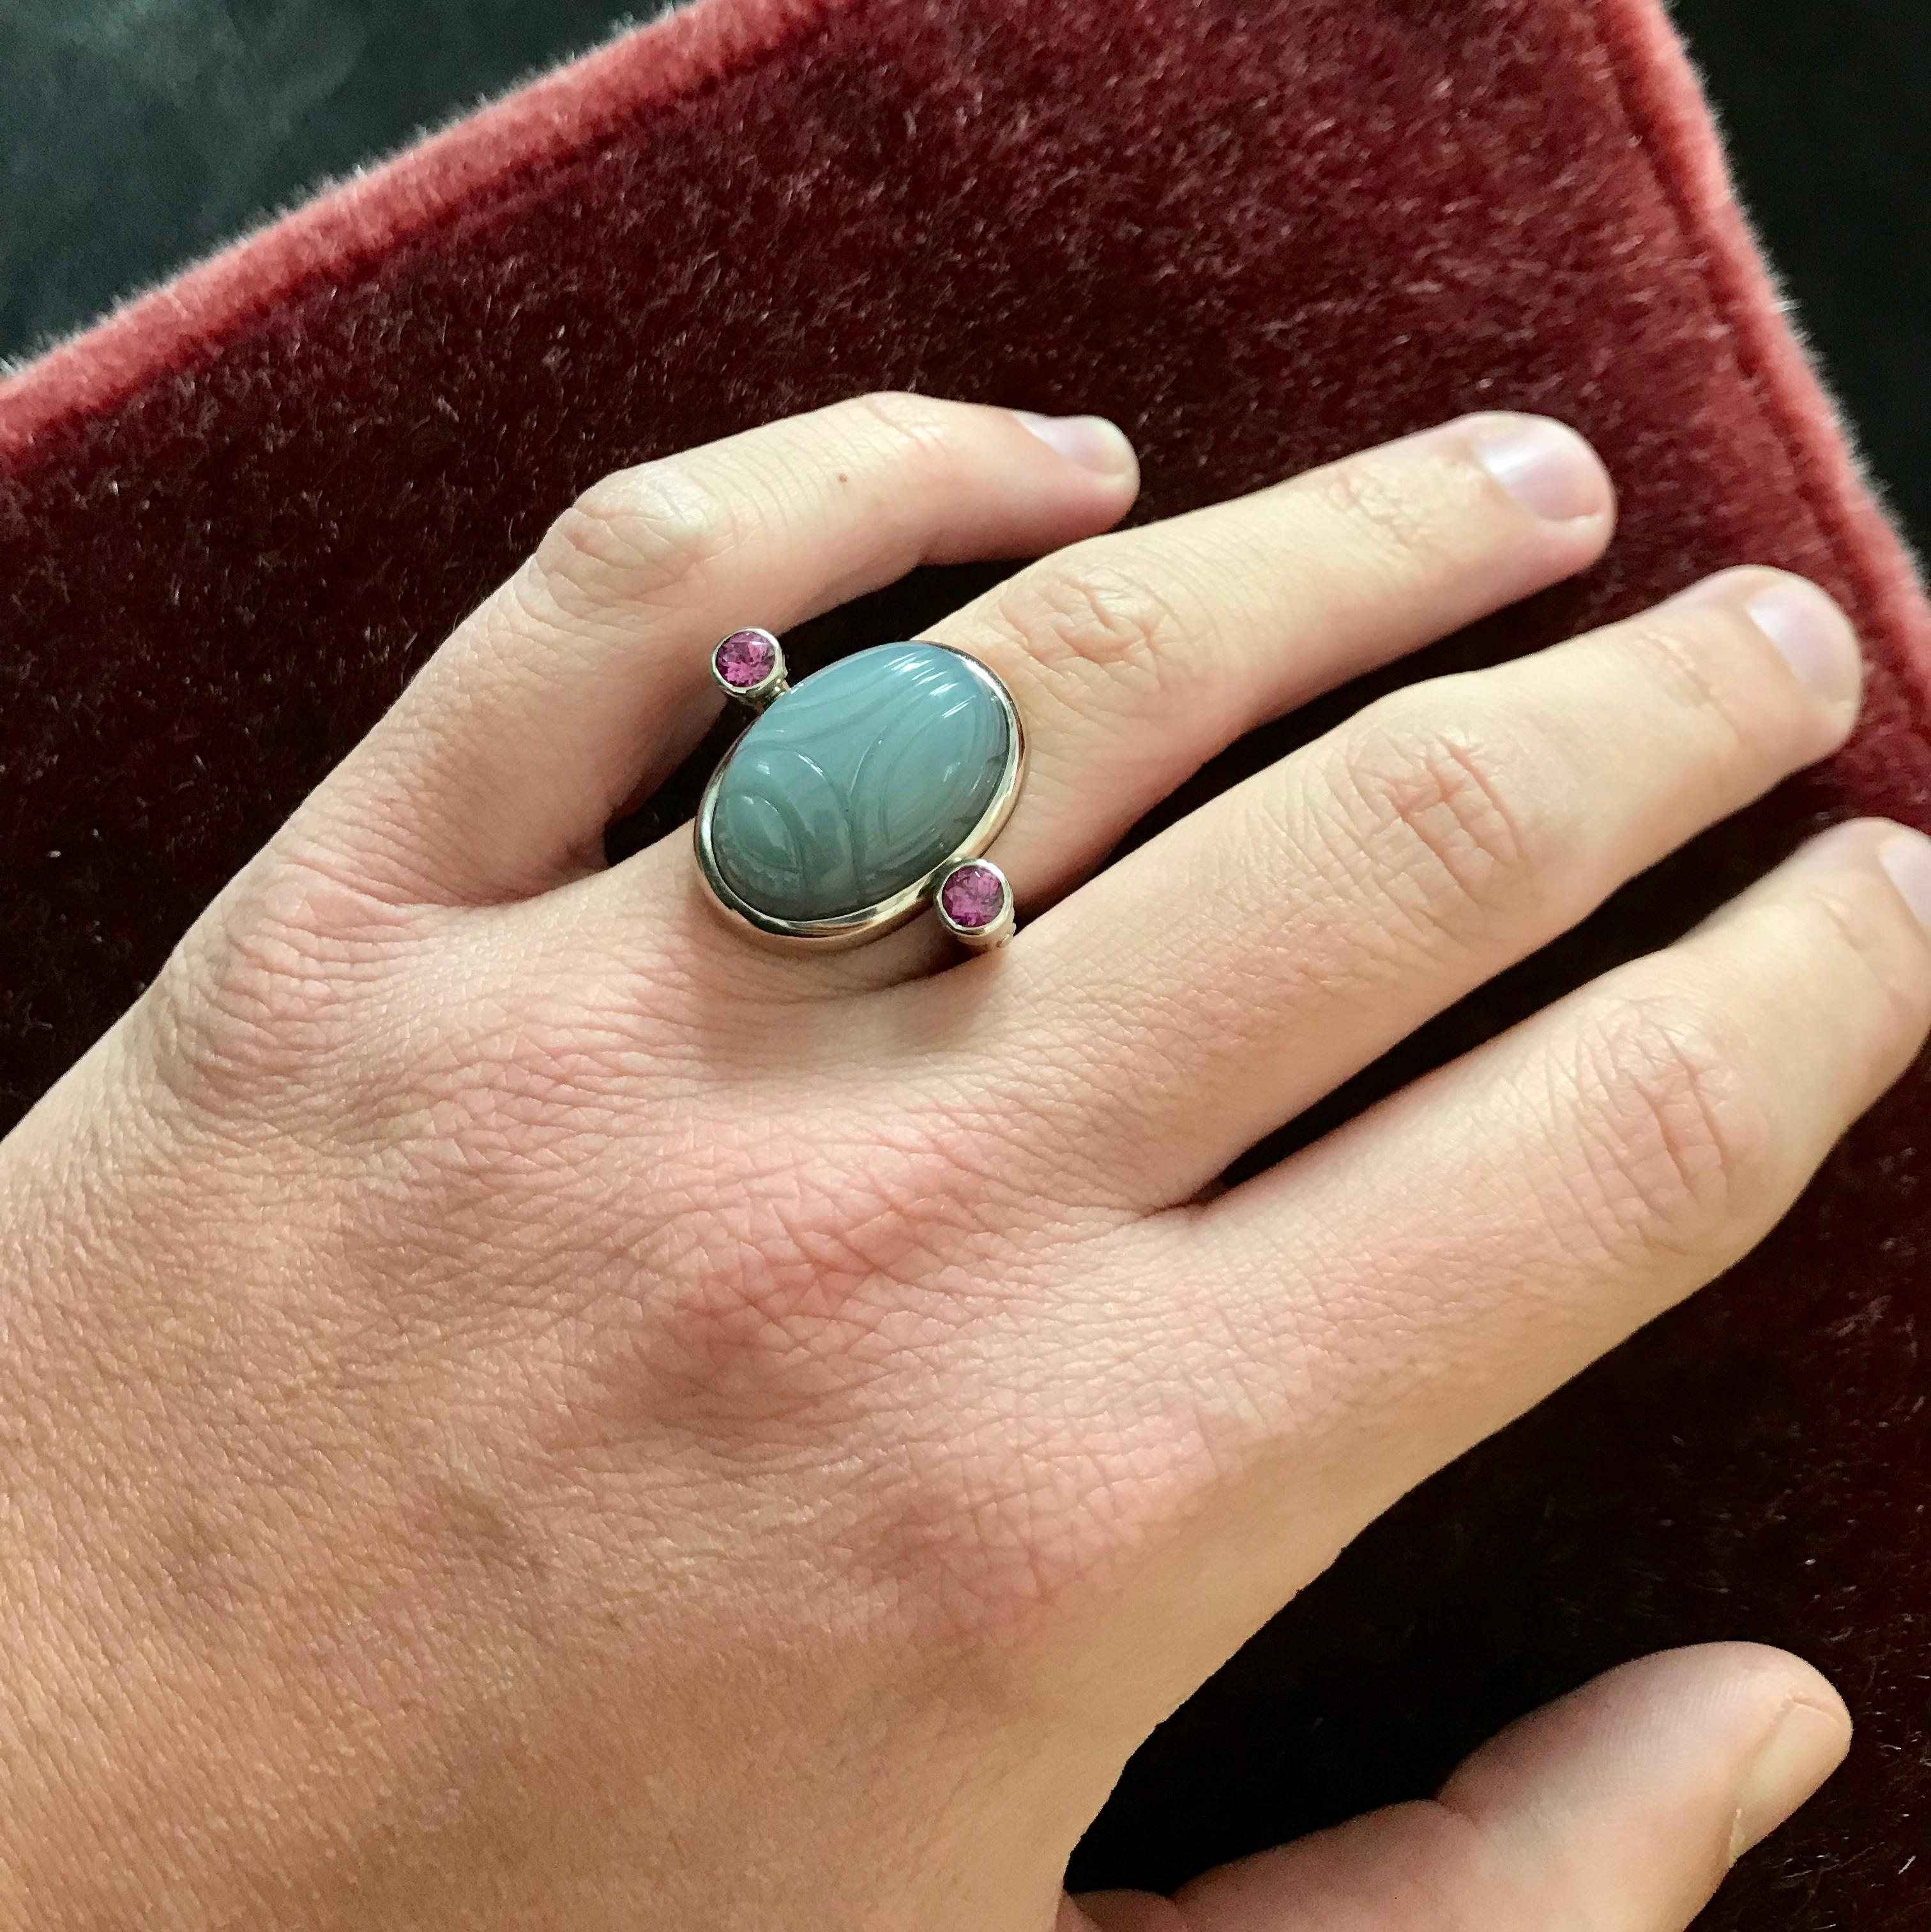 The most popular and widely recognised collection by Colleen B. Rosenblat. Engraved with the characteristic scarab motif, these colourful gems have been considered as lucky charms since ancient Egyptian times.

The ring size is US 8.0 (EU 57).